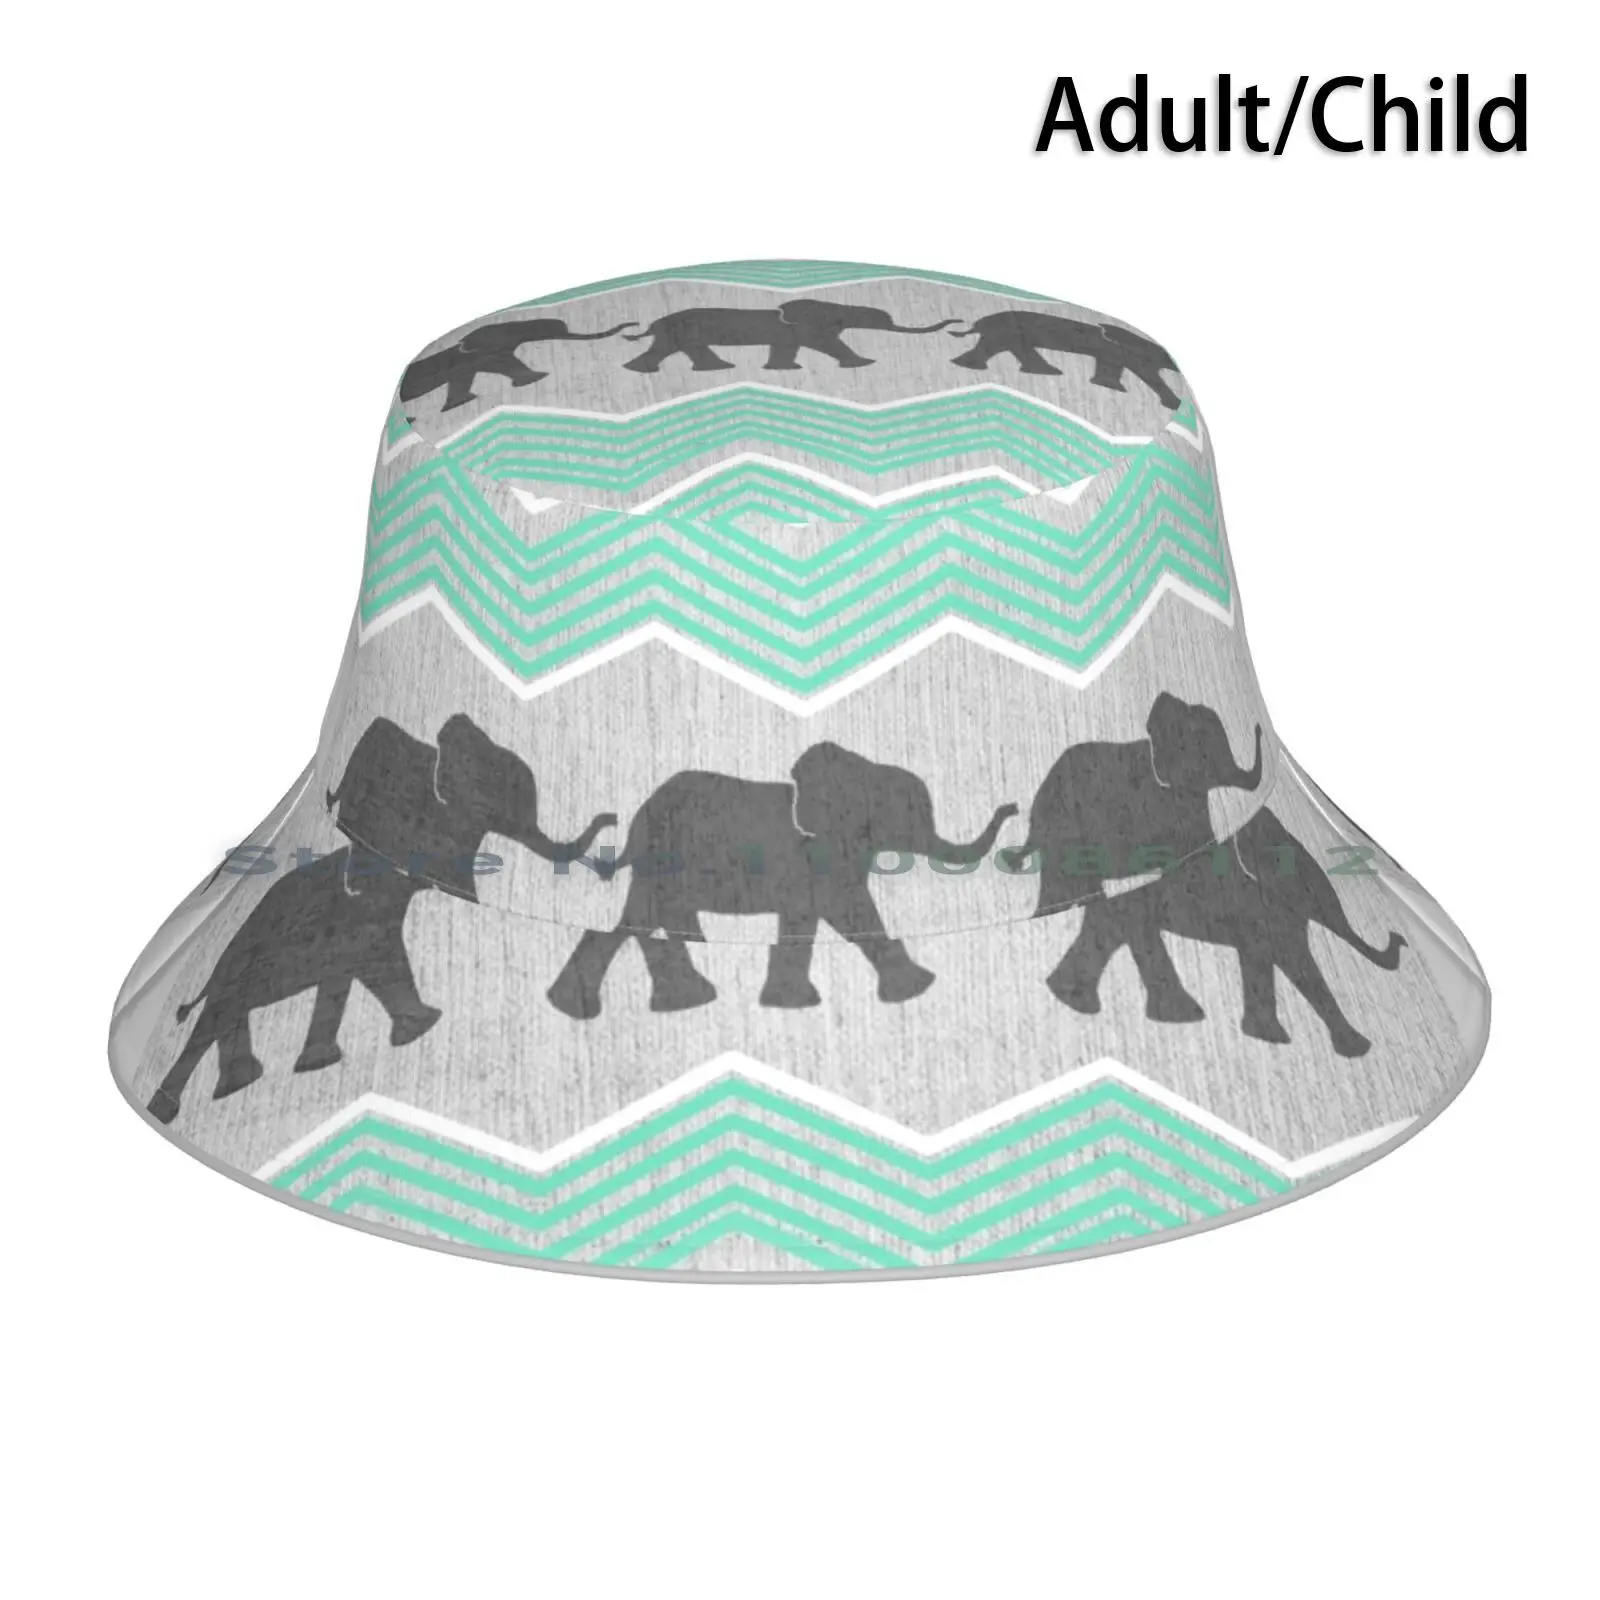 

Three Elephants Bucket Hat Sun Cap Grey Teal Turquoise Blue Wood Silver Animals Zig Zags Mint White Textured Graphic Cute